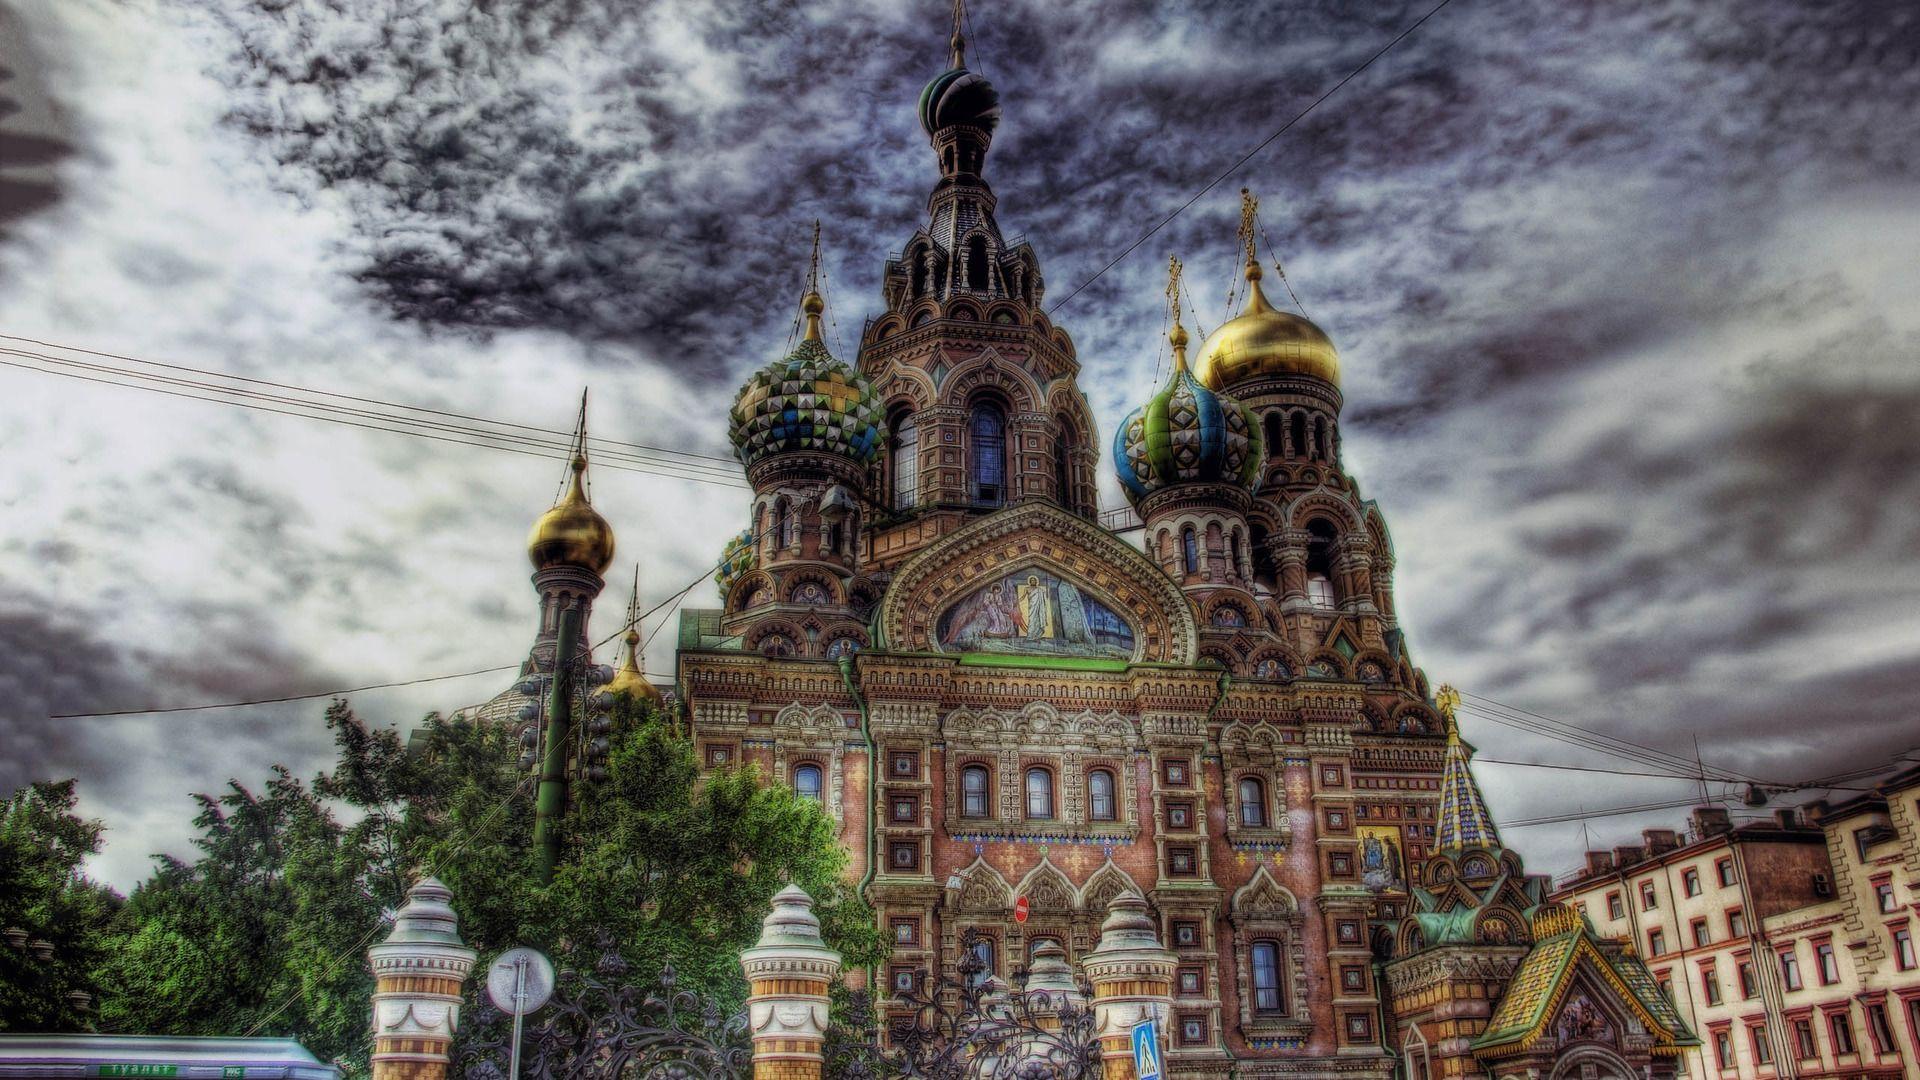 Elegant Russia Wallpaper Free Download: The Heritage Of History